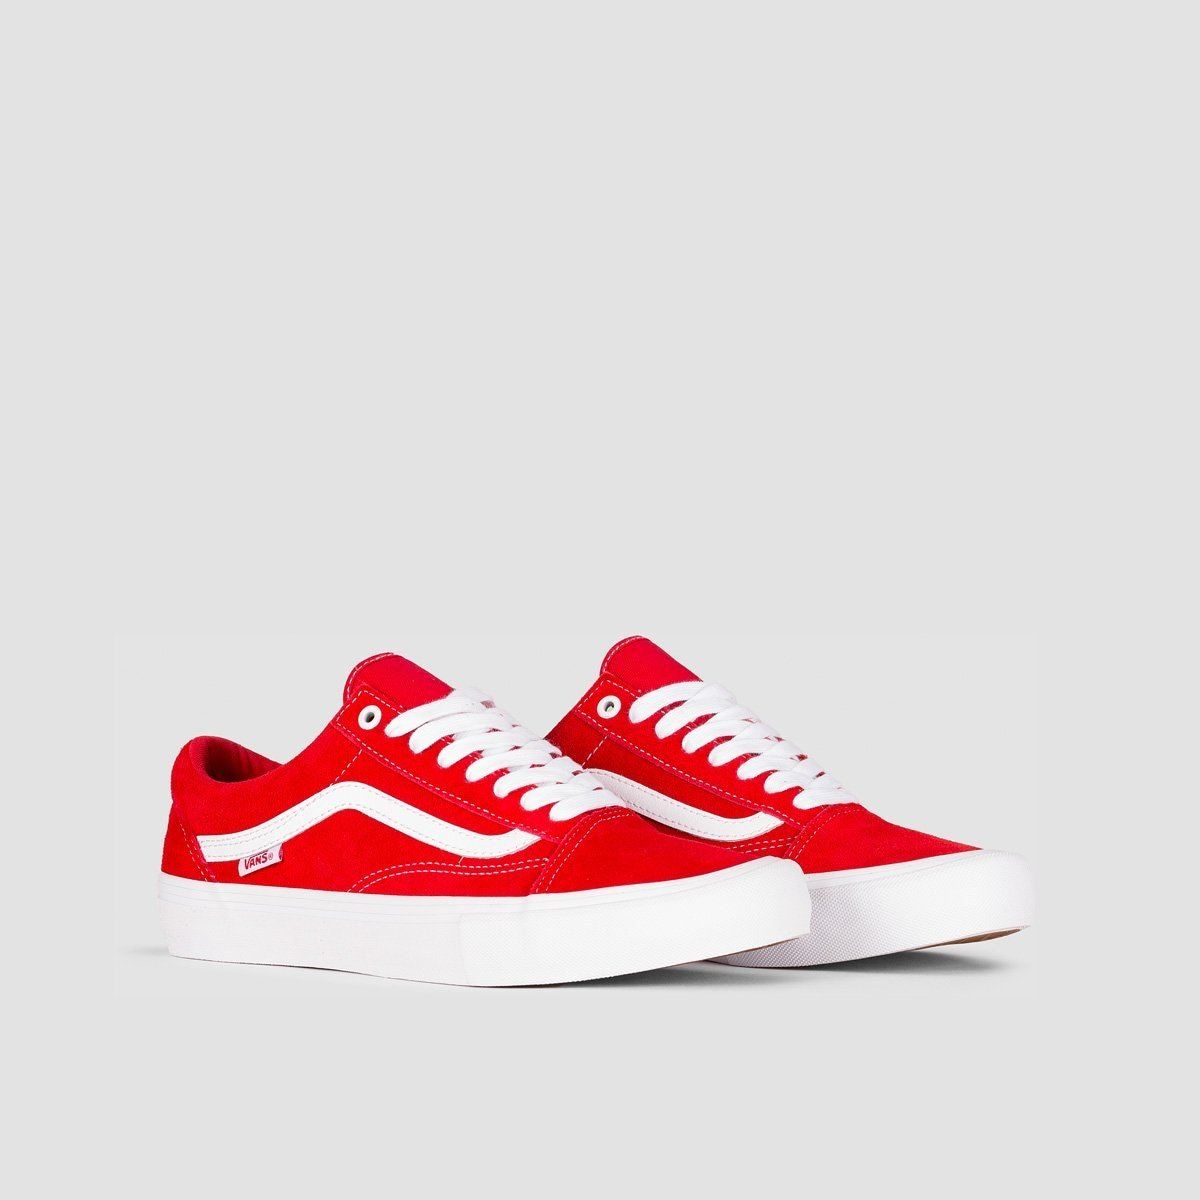 Vans Old Skool Pro Shoes - Suede Red/White